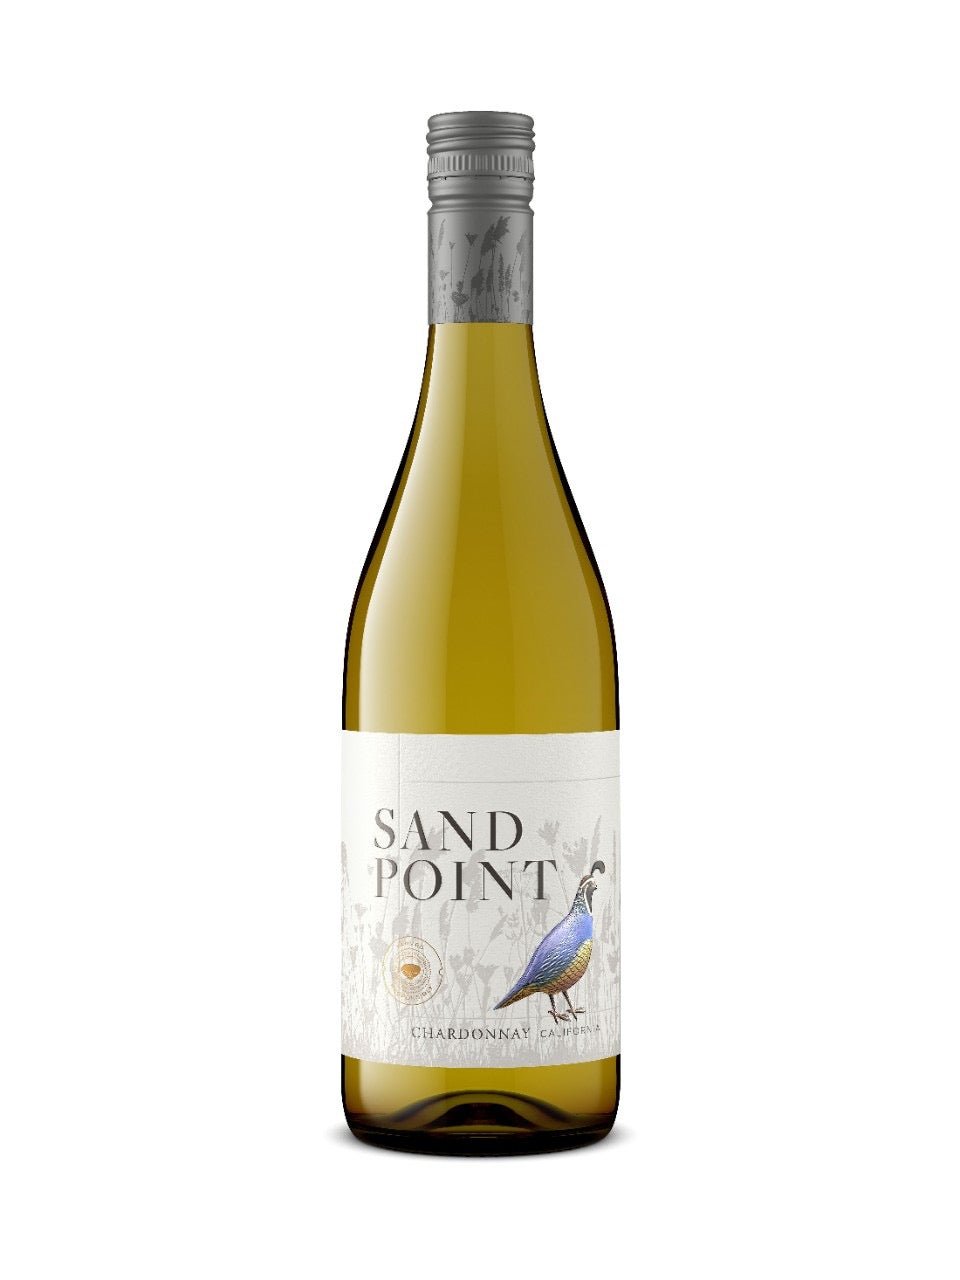 Sand Point Chardonnay | Exquisite Wine & Alcohol Gift Delivery Toronto Canada | Vyno